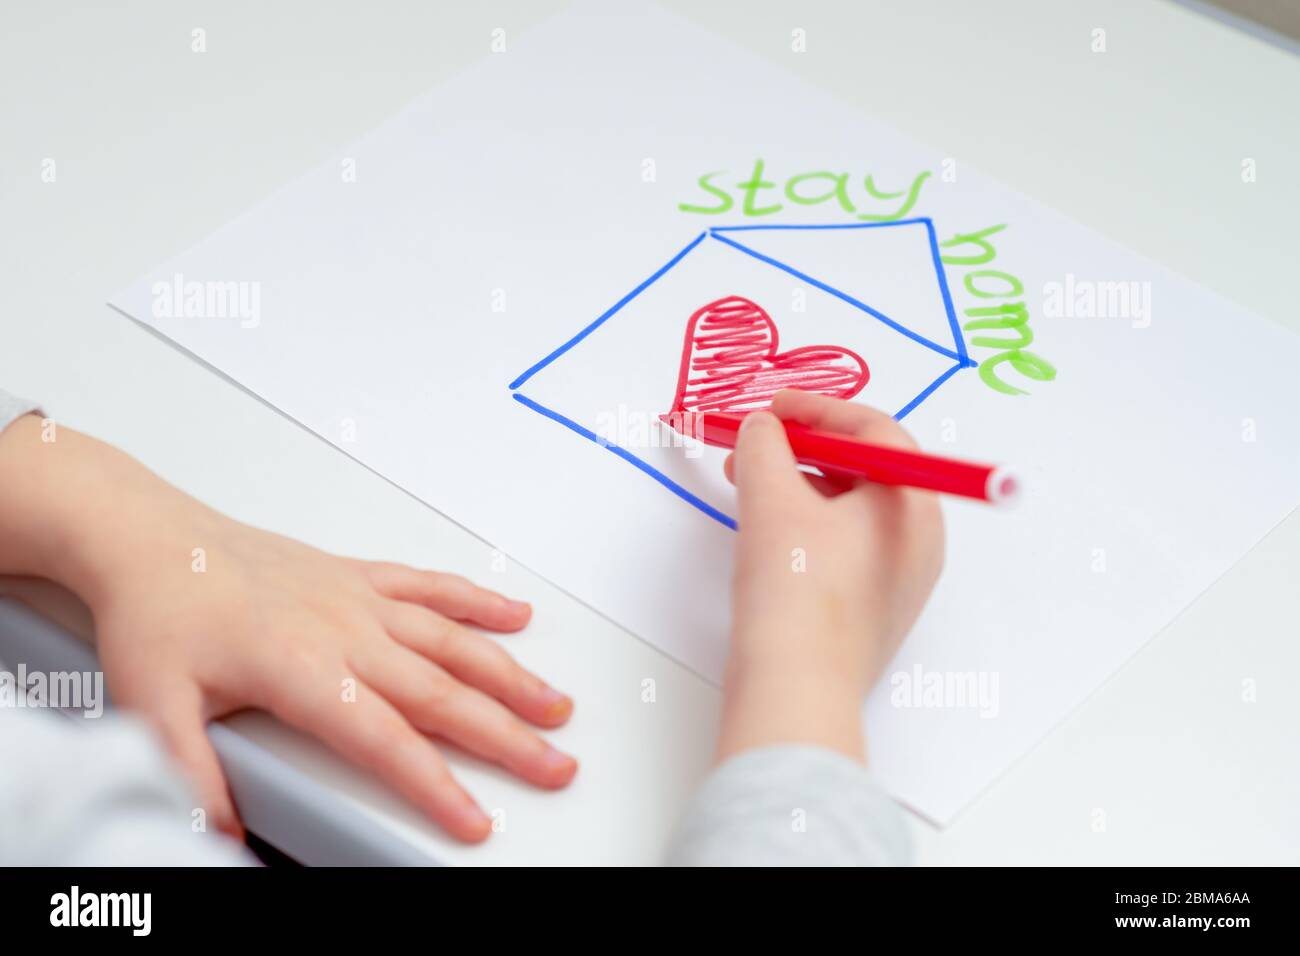 Hands of child drawing red heart inside house with words Stay Home on white sheet of paper. Stay Home concept. Stock Photo